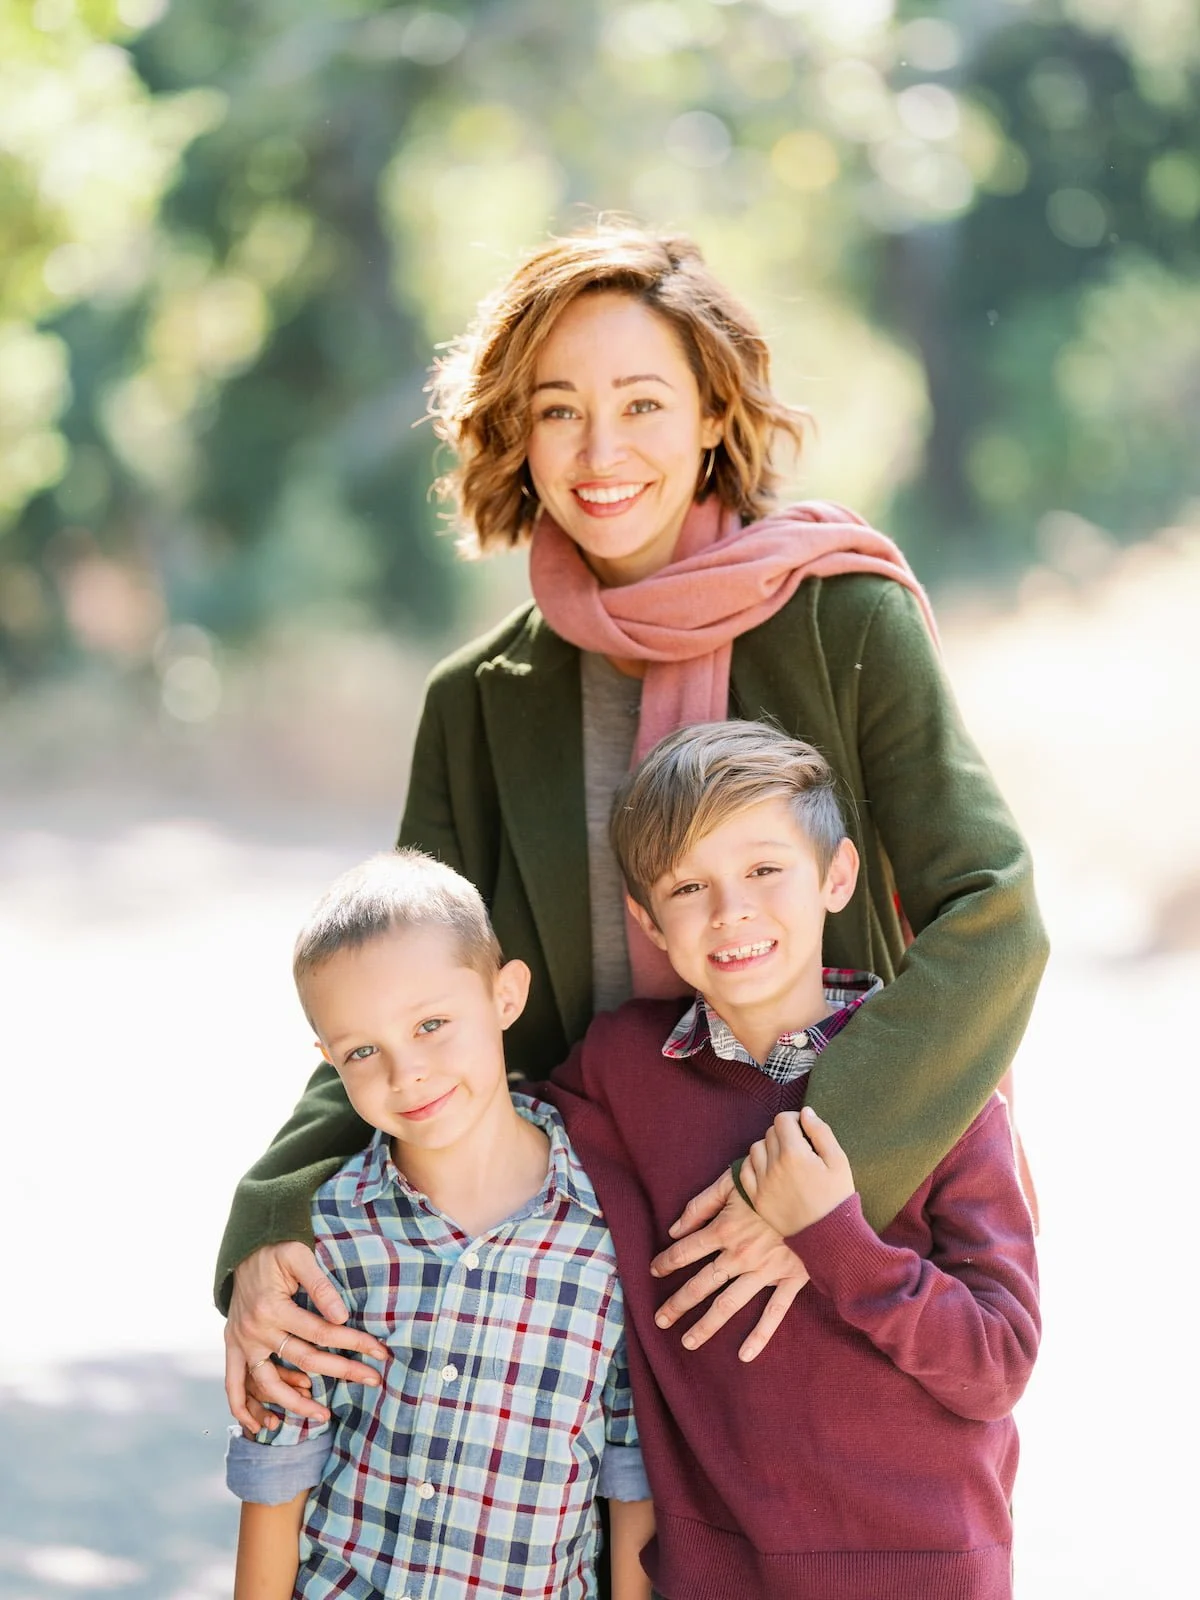 Autumn Reeser with her two sons